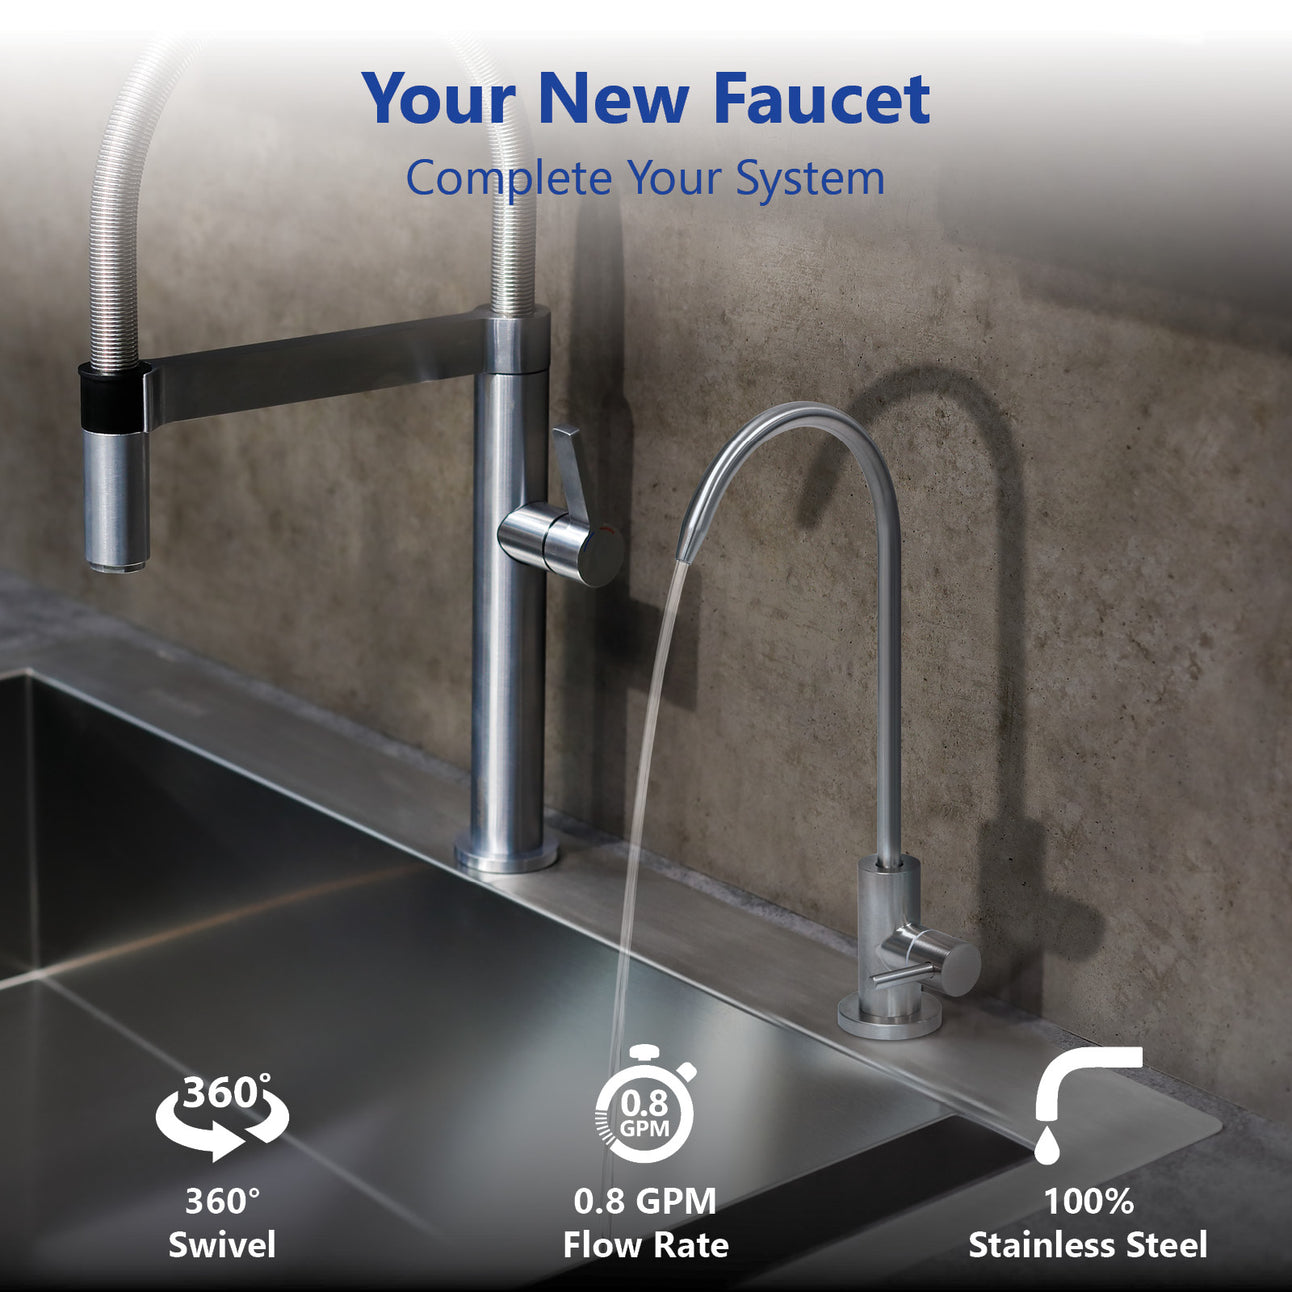 Express Water Modern Water Filter Faucet – Stainless Steel Brushed Nickel Faucet – 100% Lead-Free Drinking Water Faucet – Compatible with Reverse Osmosis Water Filtration Systems